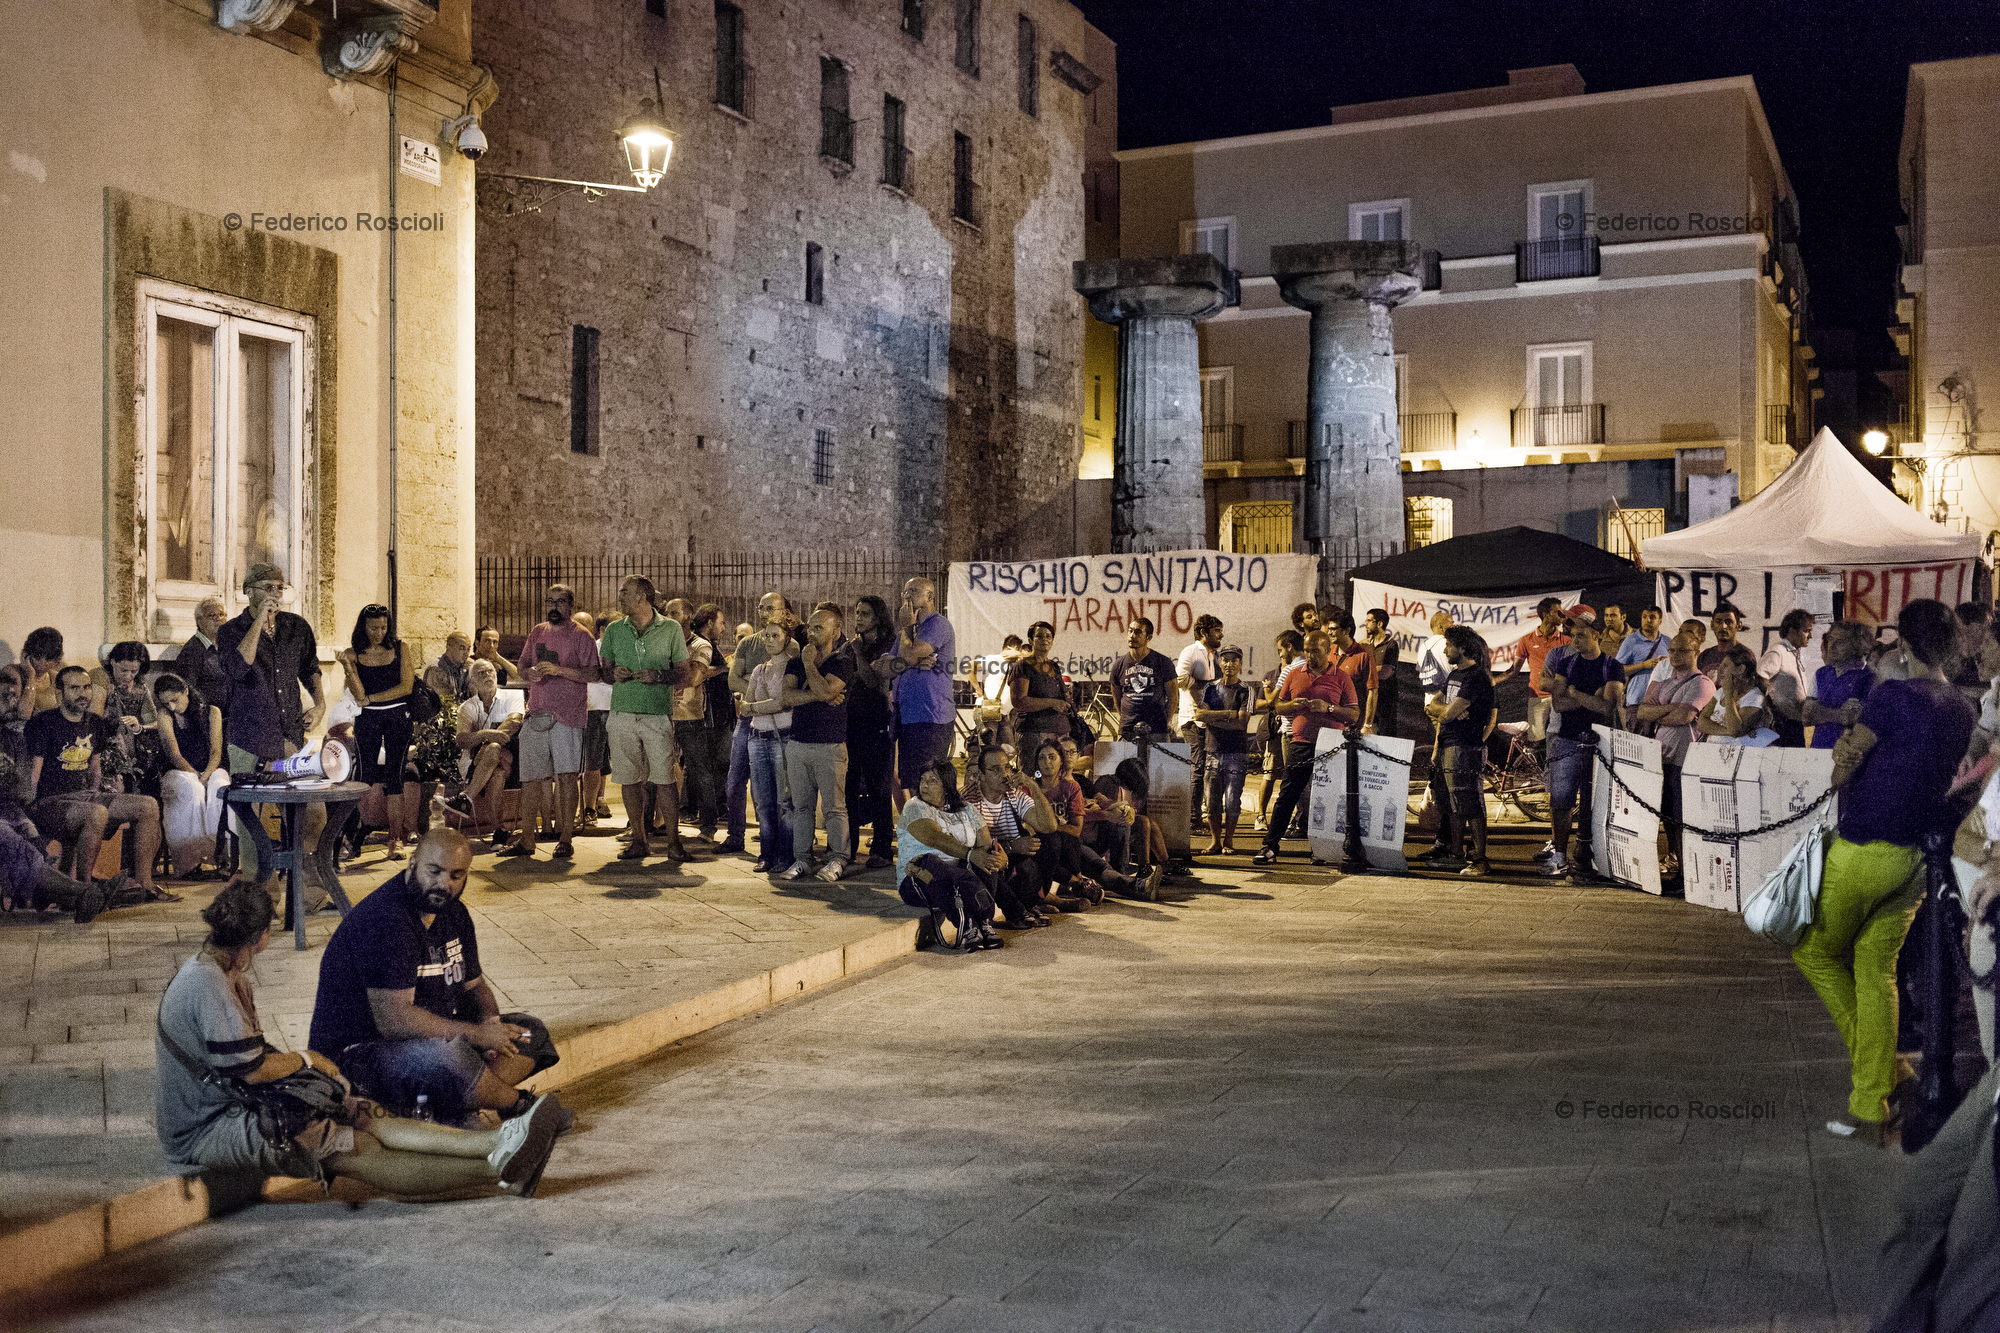 Taranto, Italy, September 11, 2013. A meeting during the third day of protests in front of the municipality of Taranto. This sit-in lasted 26 days and was organized by associations and citizens of Taranto united under the name of 'Cittadini #fuoridalcomune' (Citizens outside of the municipality building): they asked more attention and participation by the local institution on environmental issues.